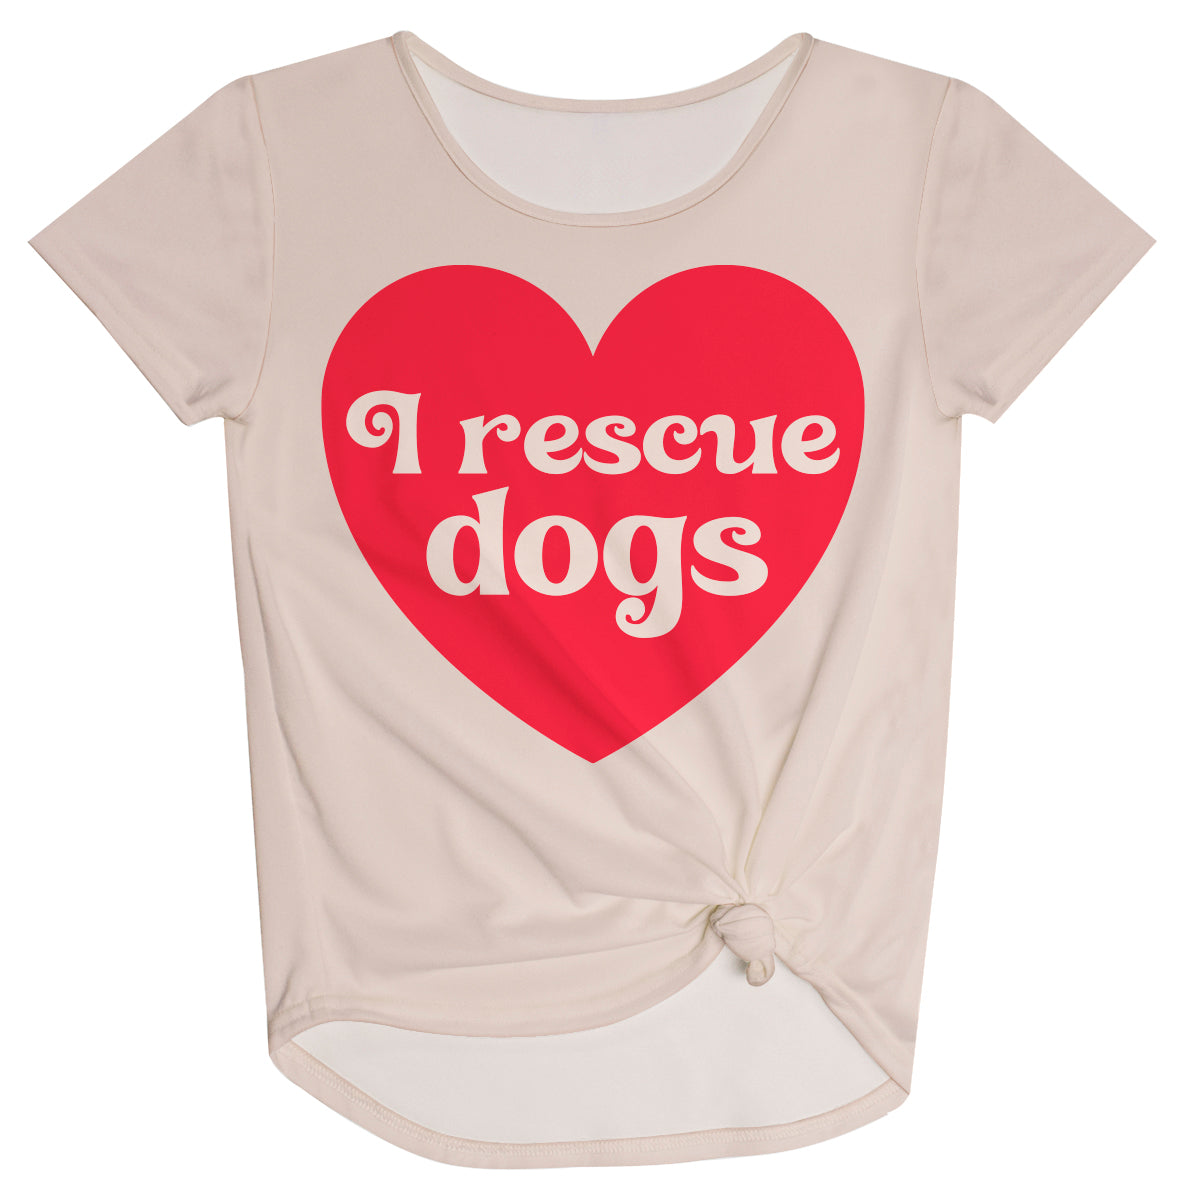 I Rescue Dogs Beige Knot Top